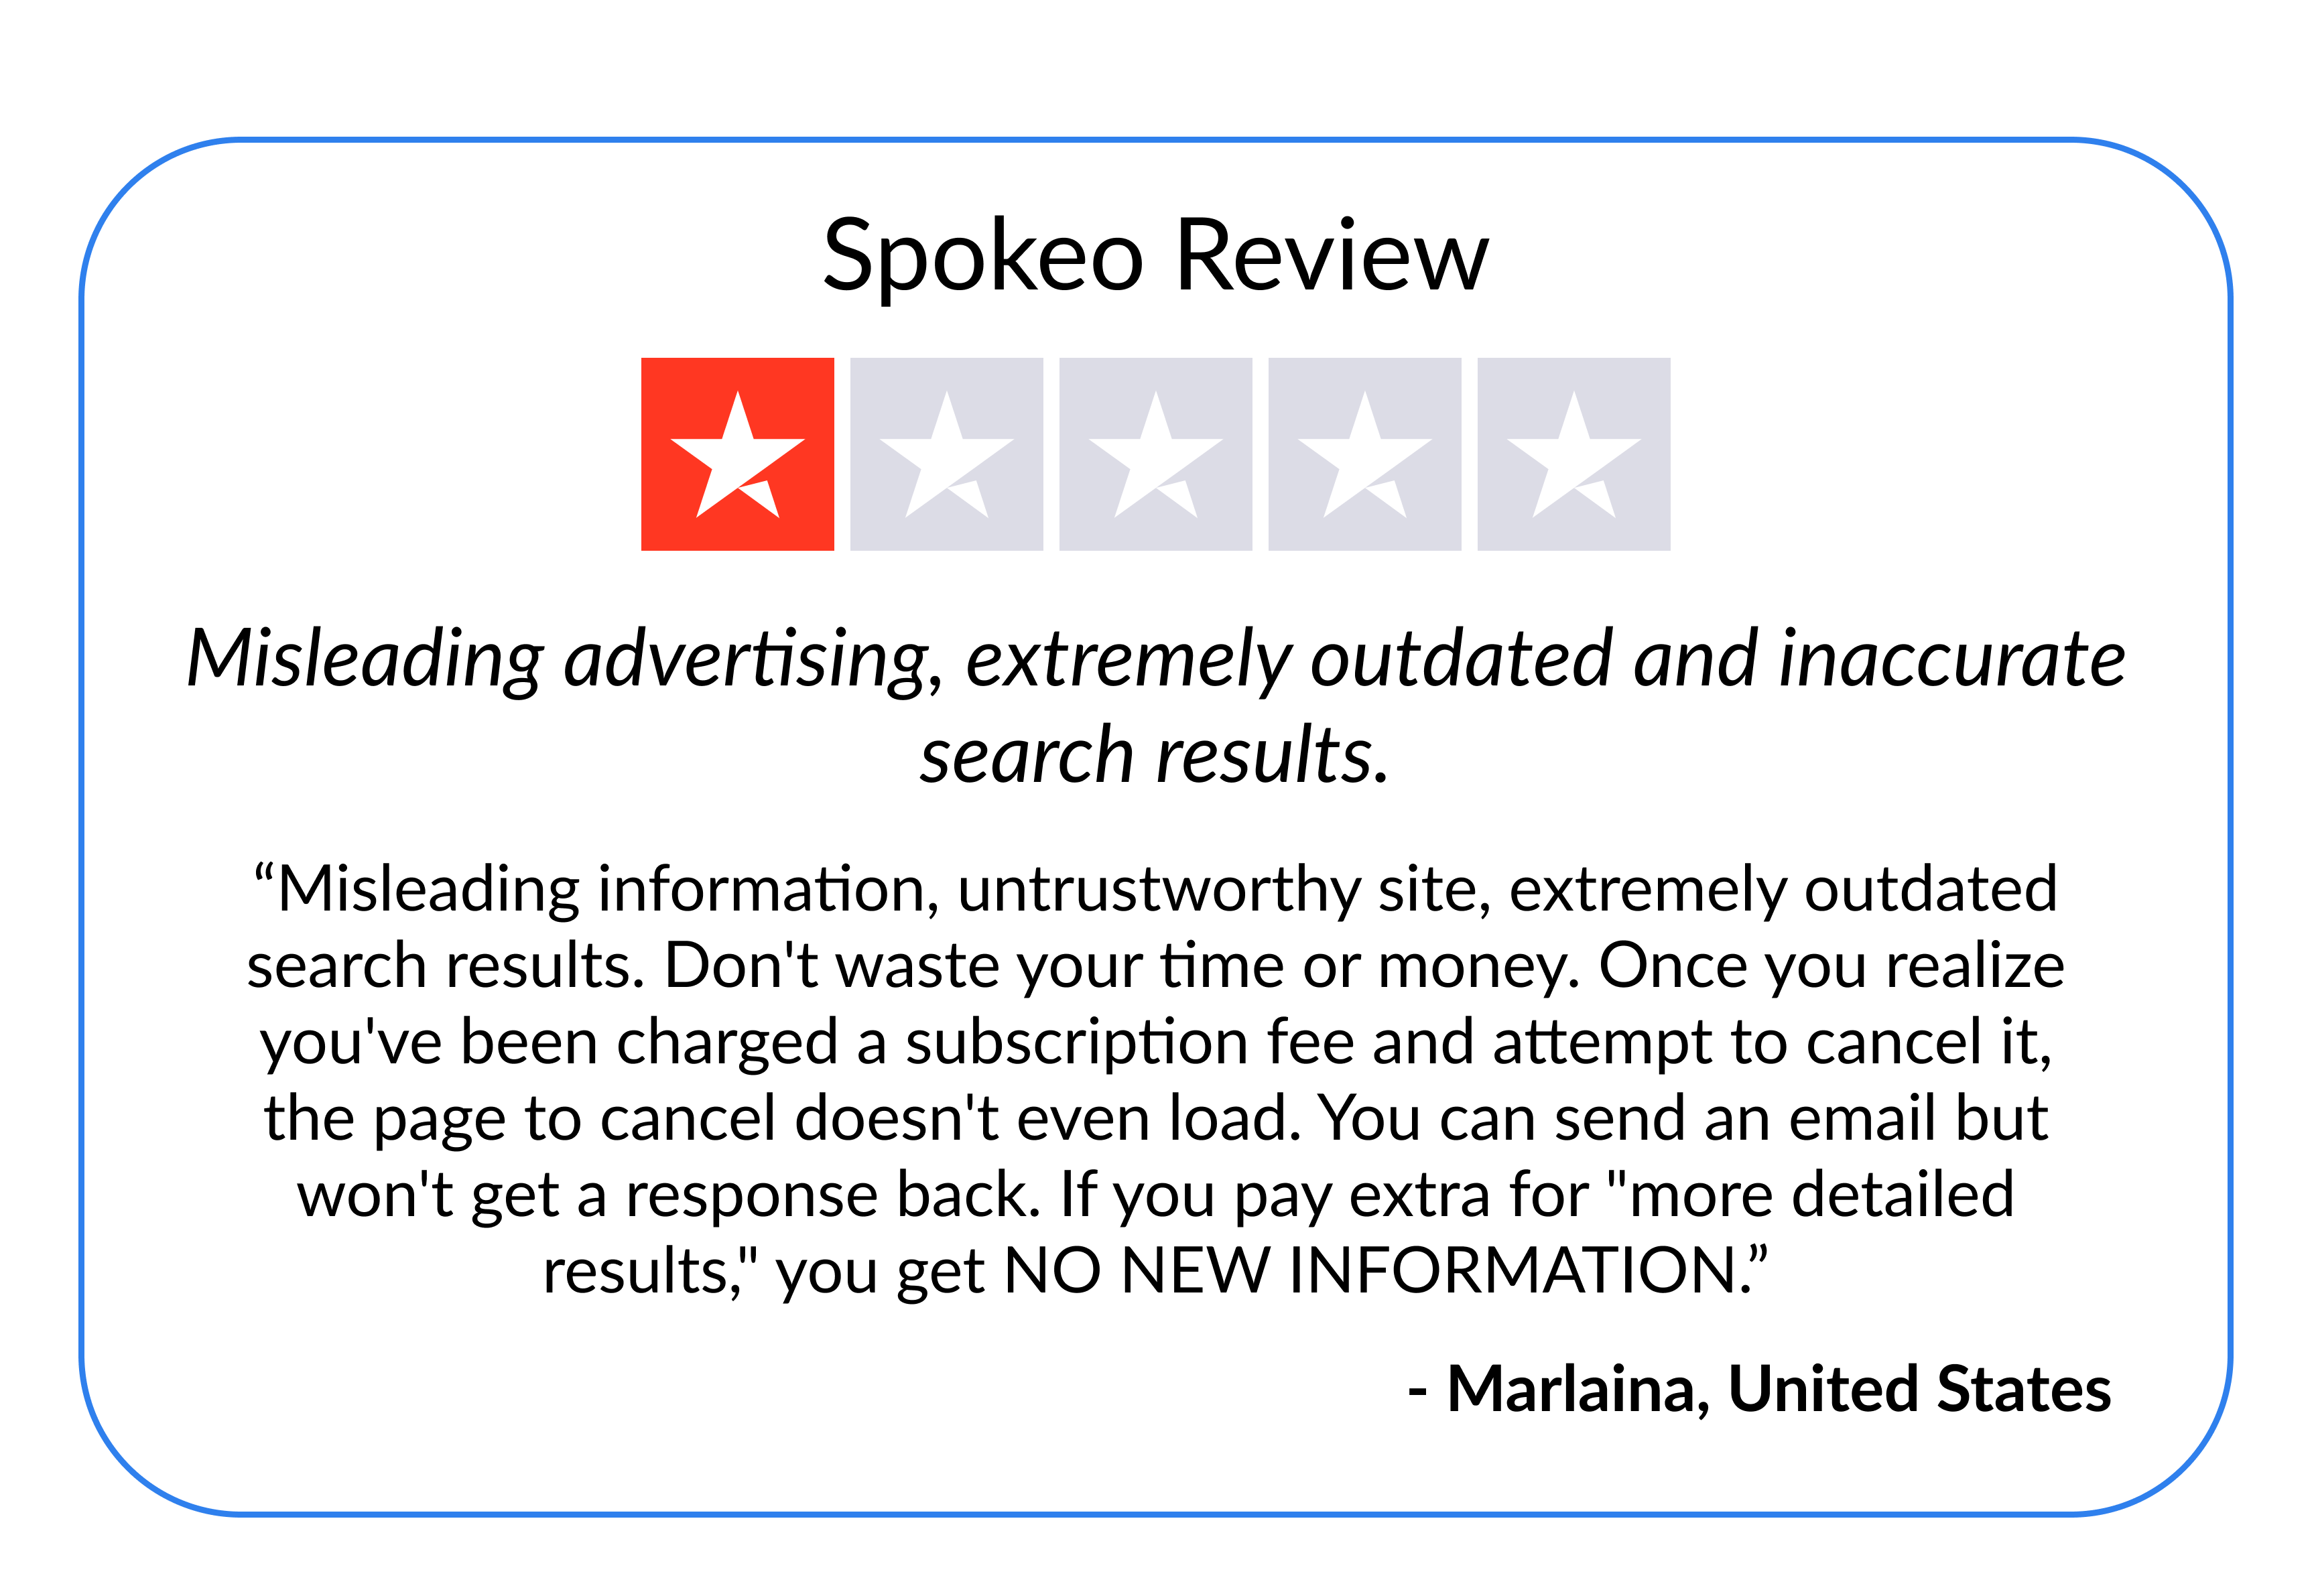 a customer review of Spokeo.com, who complained of misleading results and a poor experience